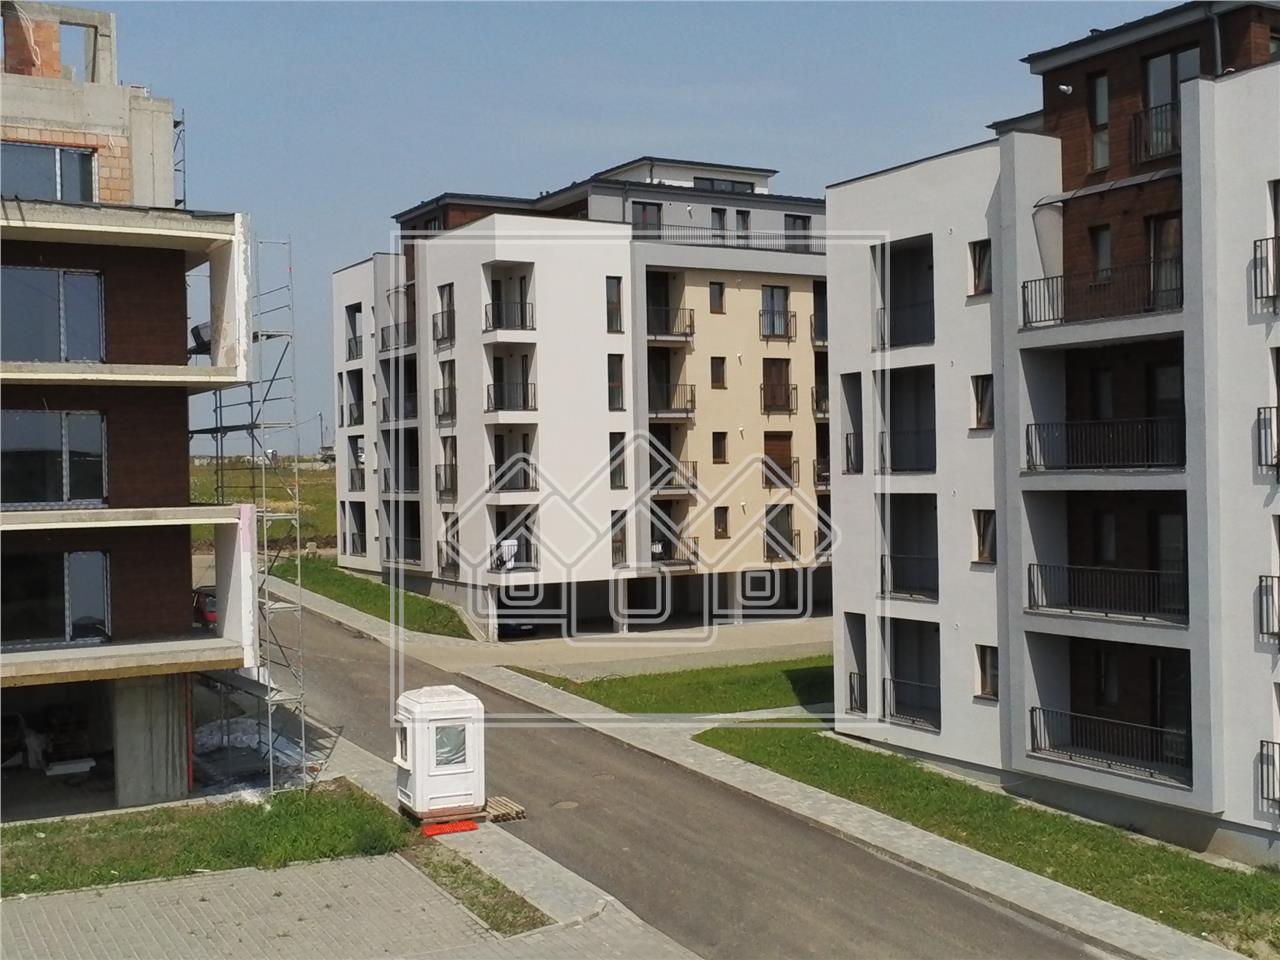 Apartment for sale in Sibiu - 2 rooms - elevator - storage room